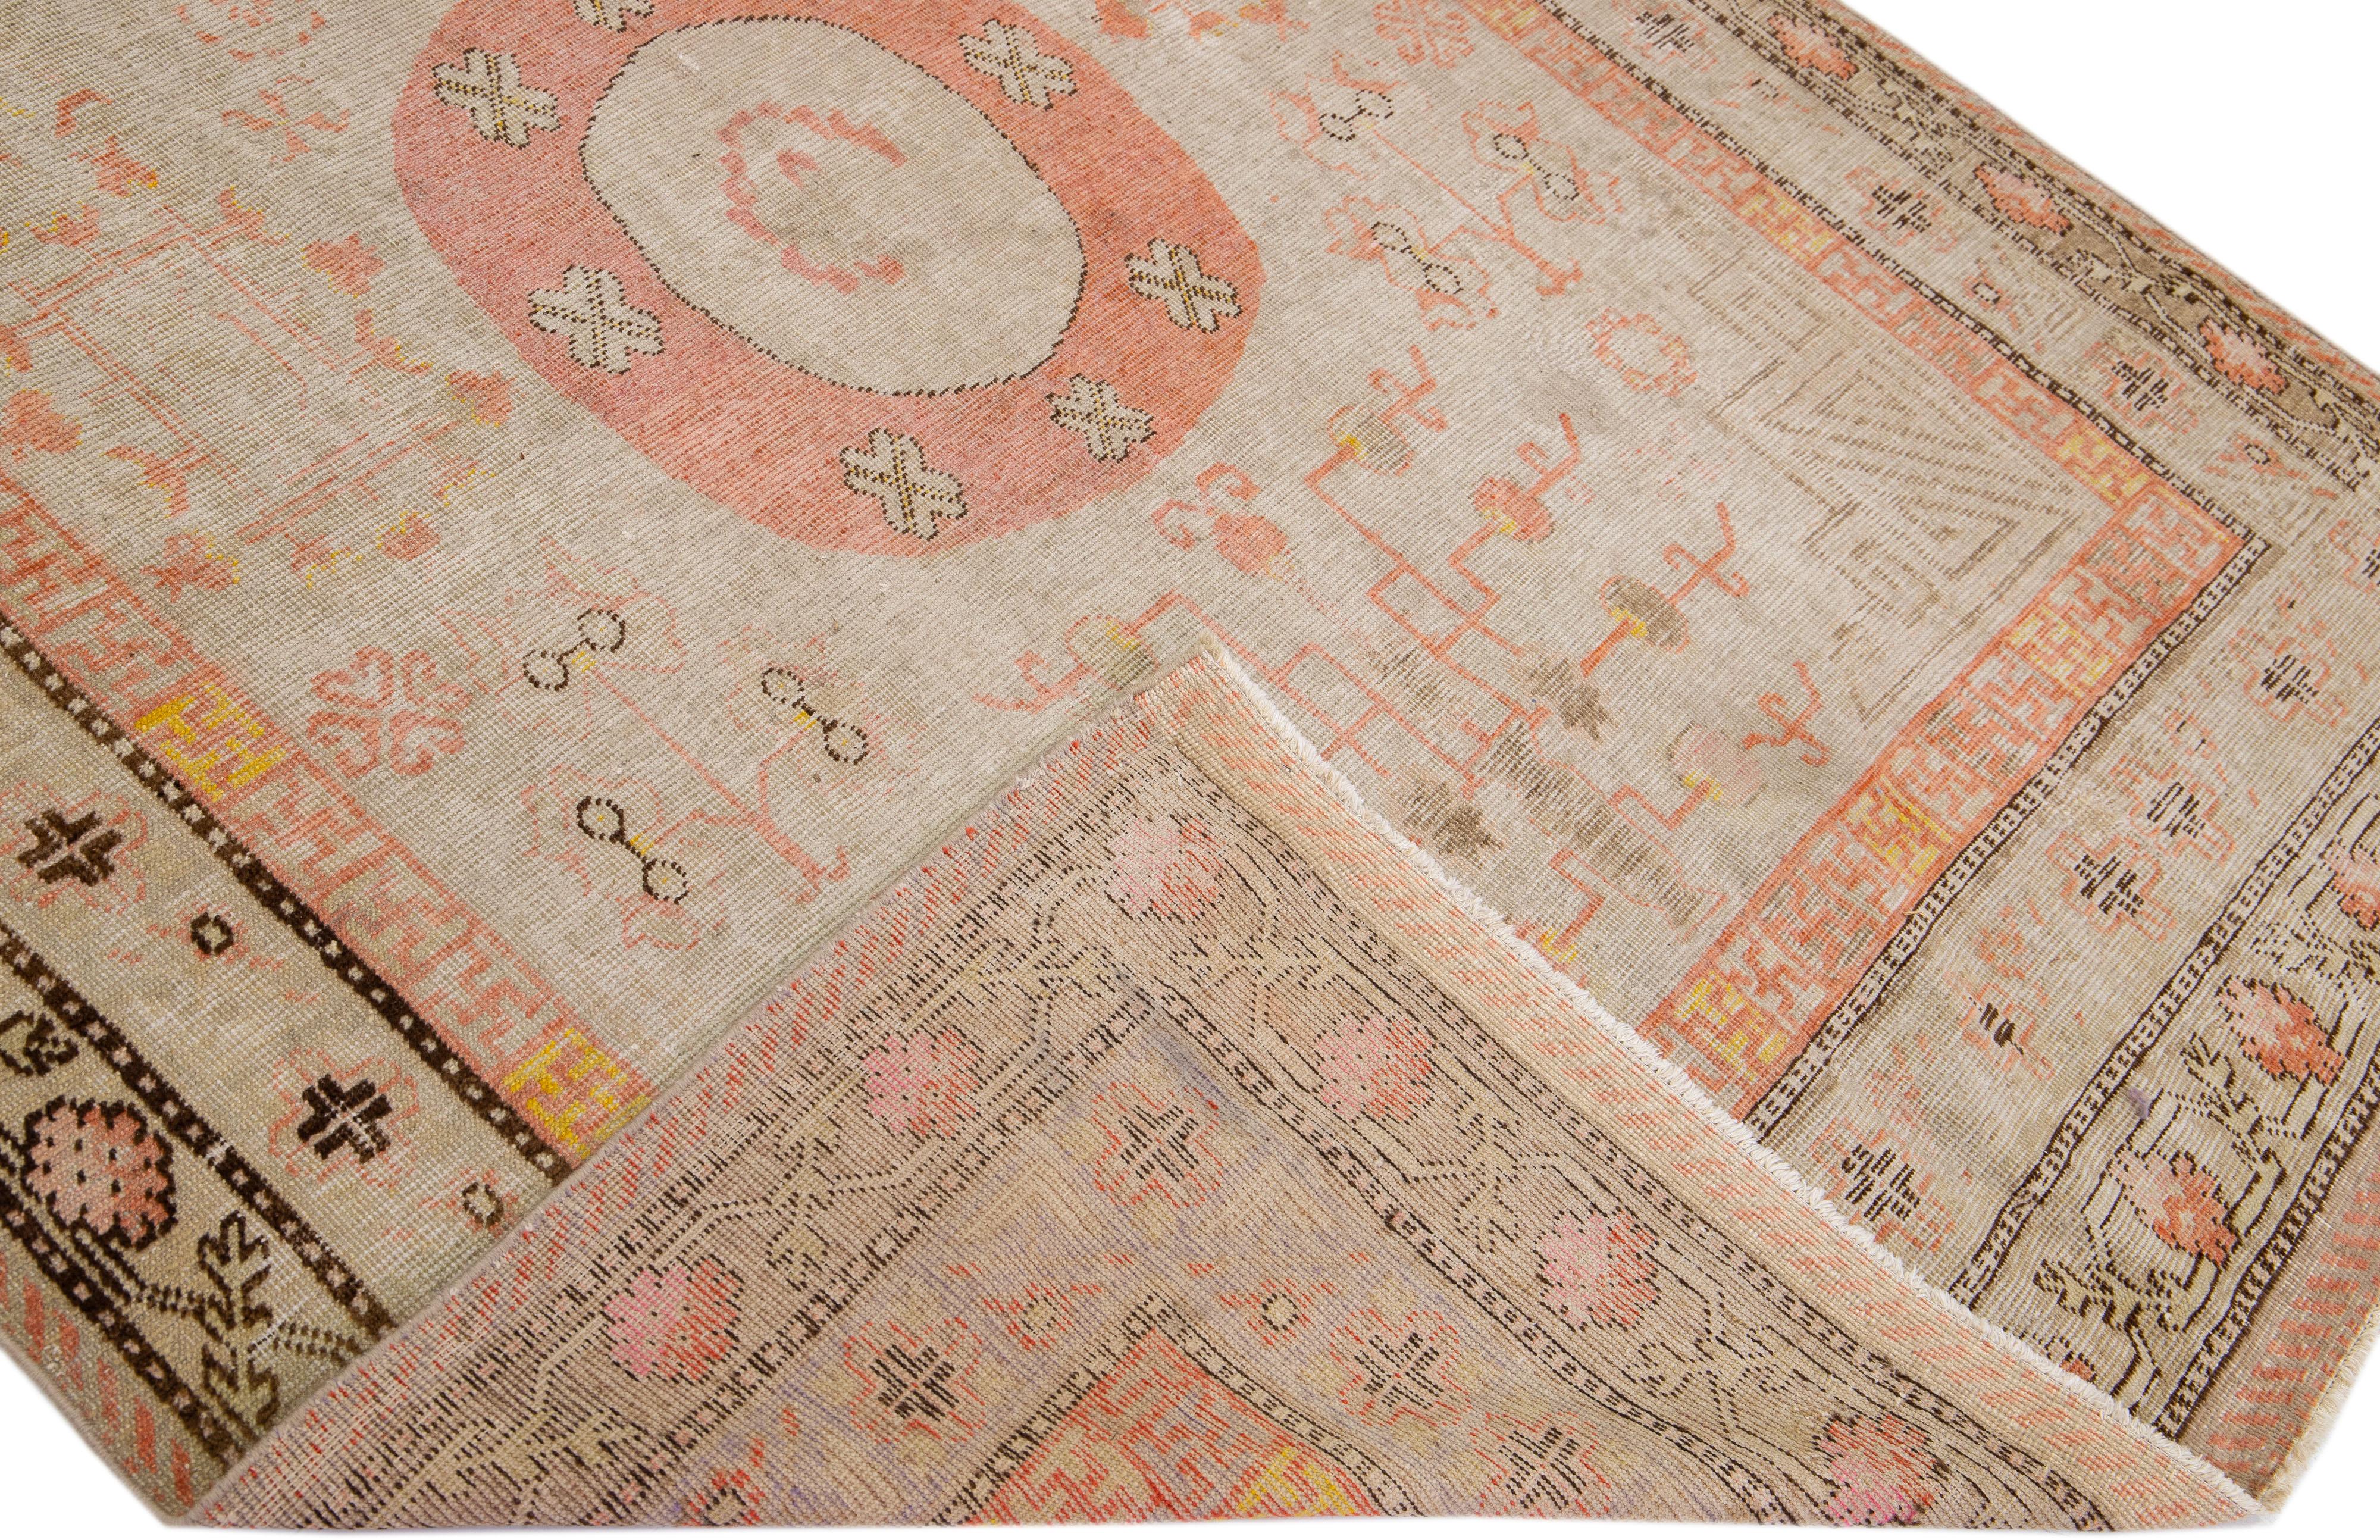 Beautiful antique Khotan hand-knotted wool rug with a beige color field. This Khotan rug has brown, yellow, and peach accents in a geometric multi-medallion design. 

This rug measures 5'6